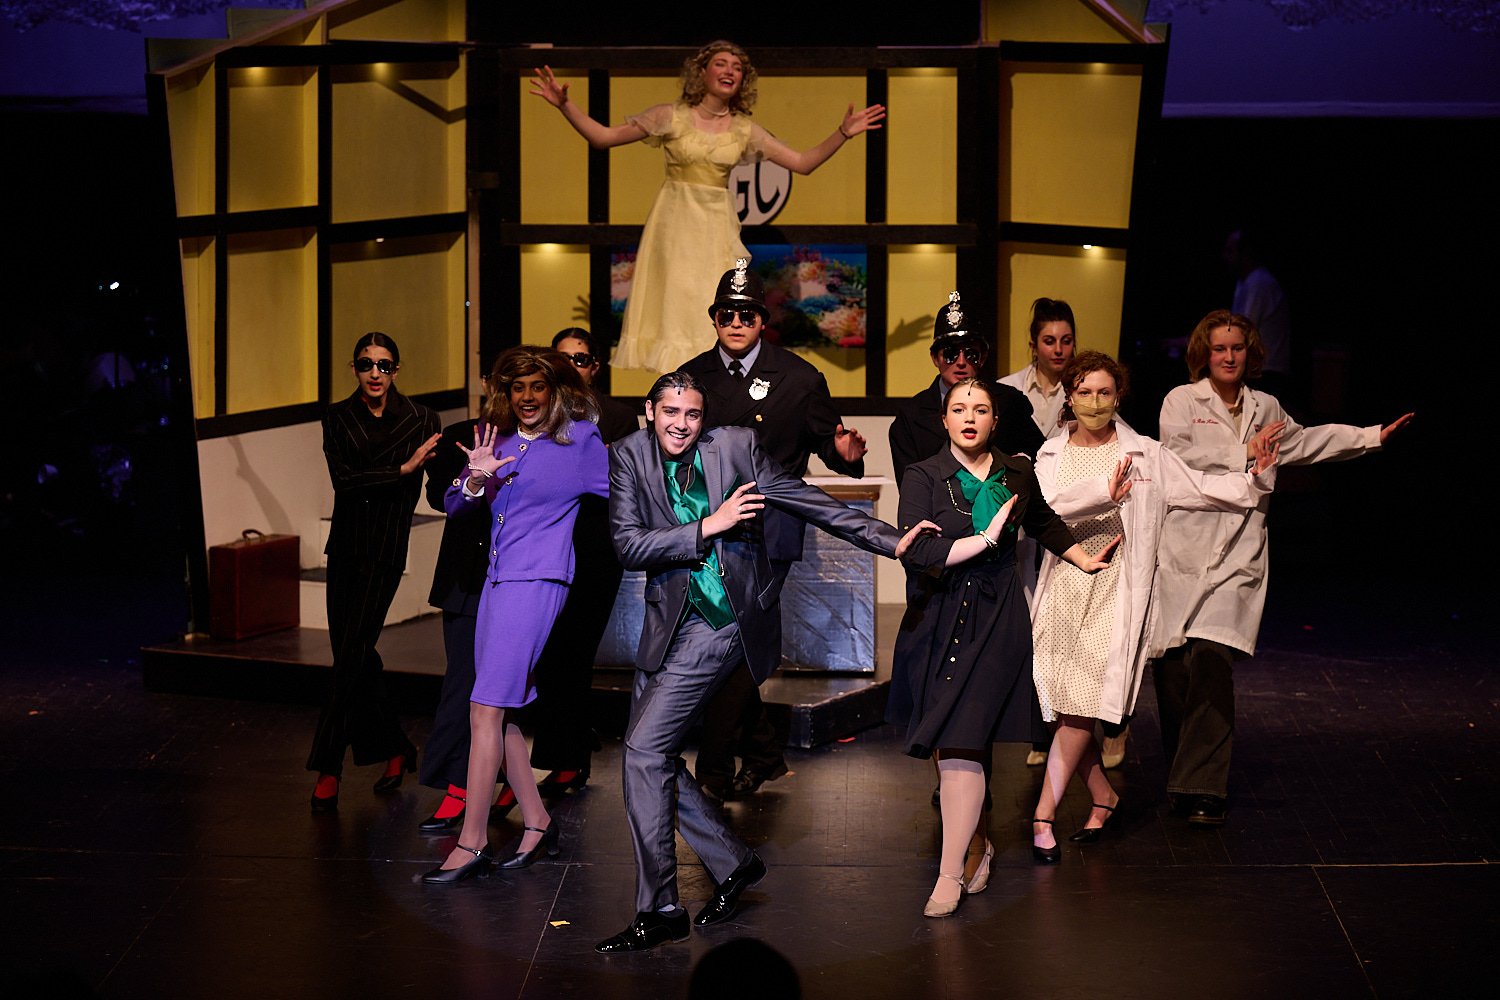  SEWICKLEY, PA, USA - MARCH 2ND 2022: High School students of Sewickley Academy are performing in an annual musical show “Urinetown” running on March 3rd-5th 2022. Ibrahim Khan 